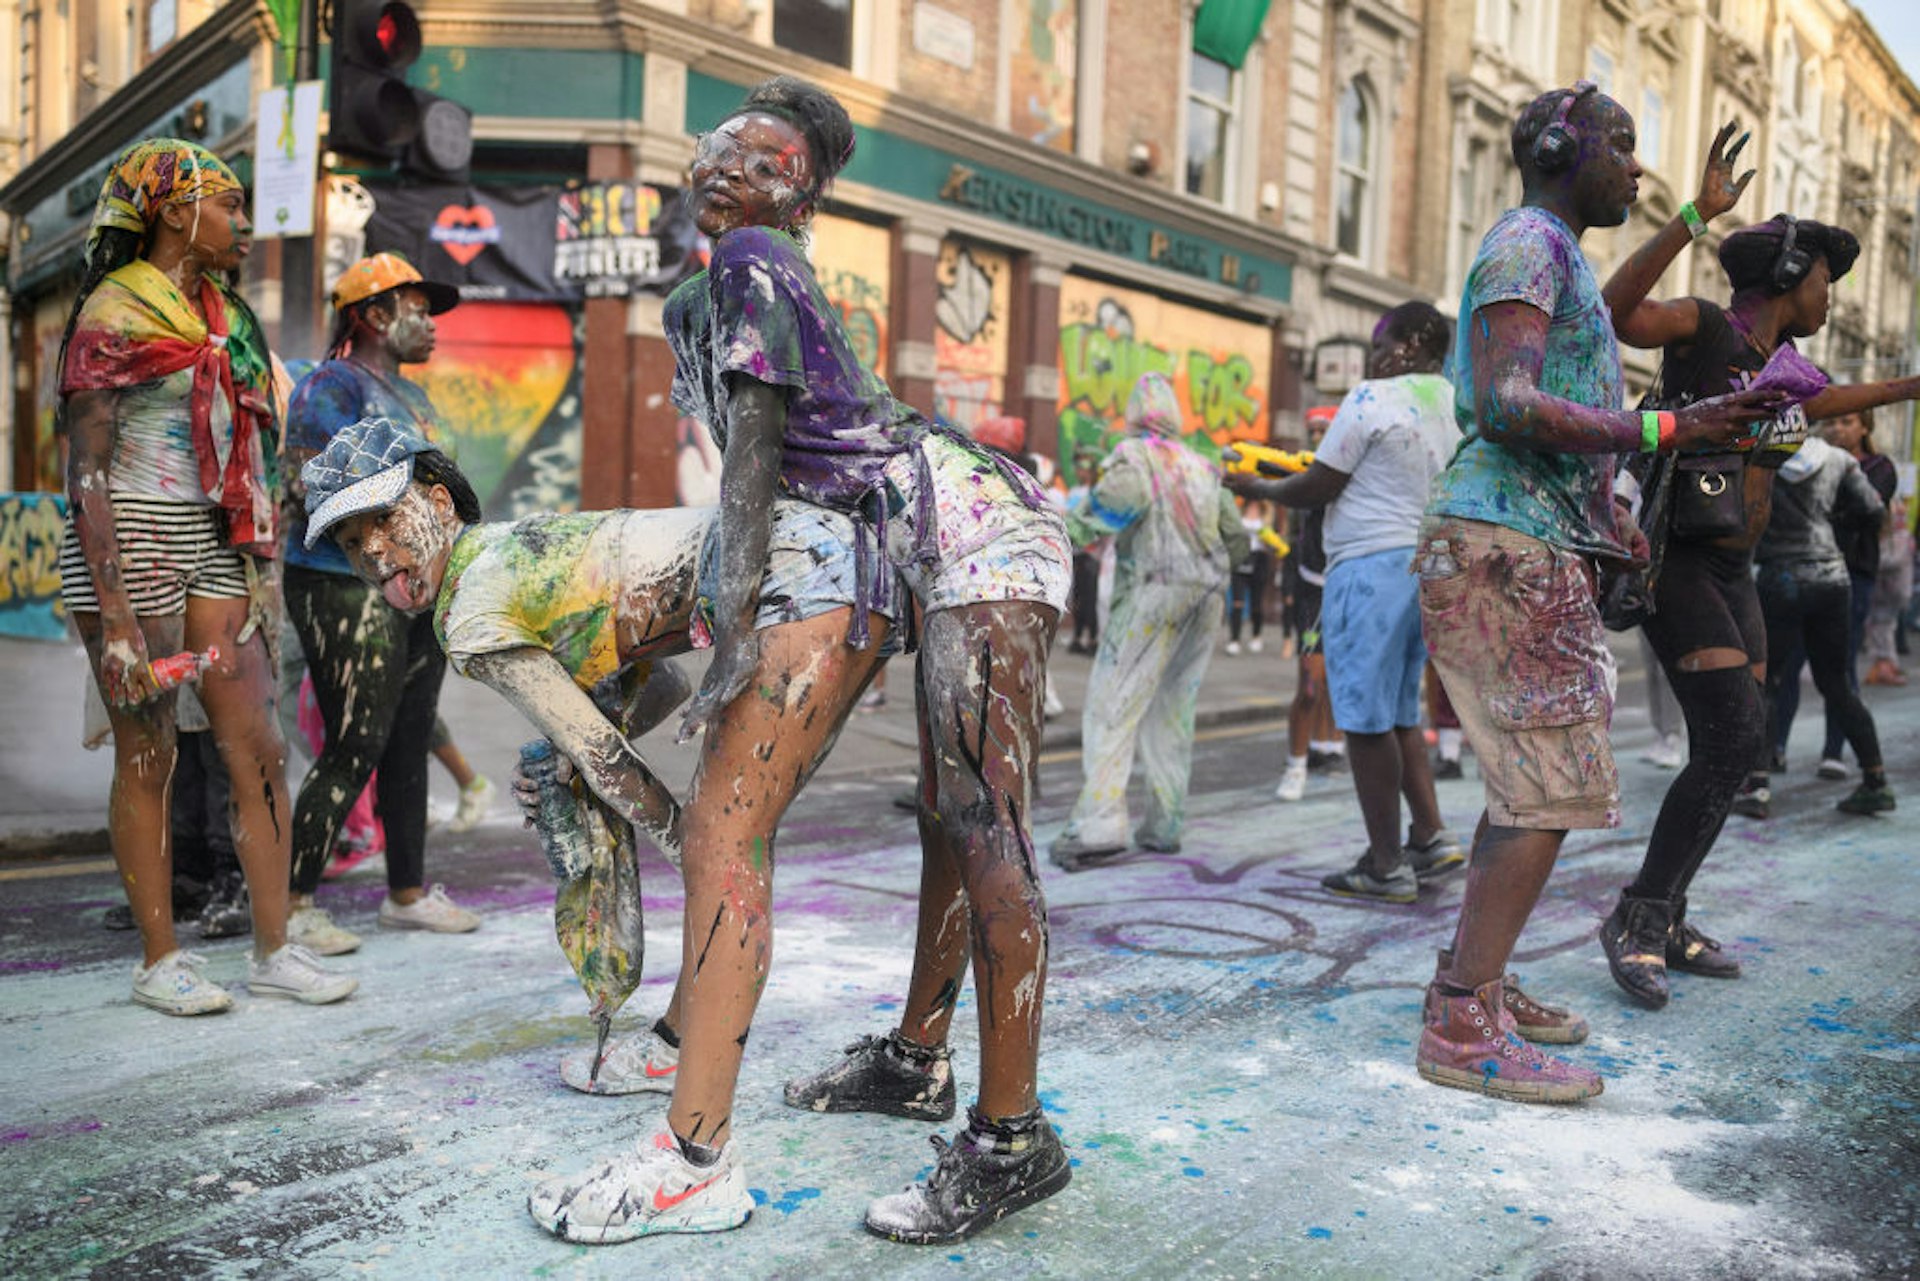 Paint-covered revellers take part in the traditional "J'ouvert" opening parade of the Notting Hill carnival 